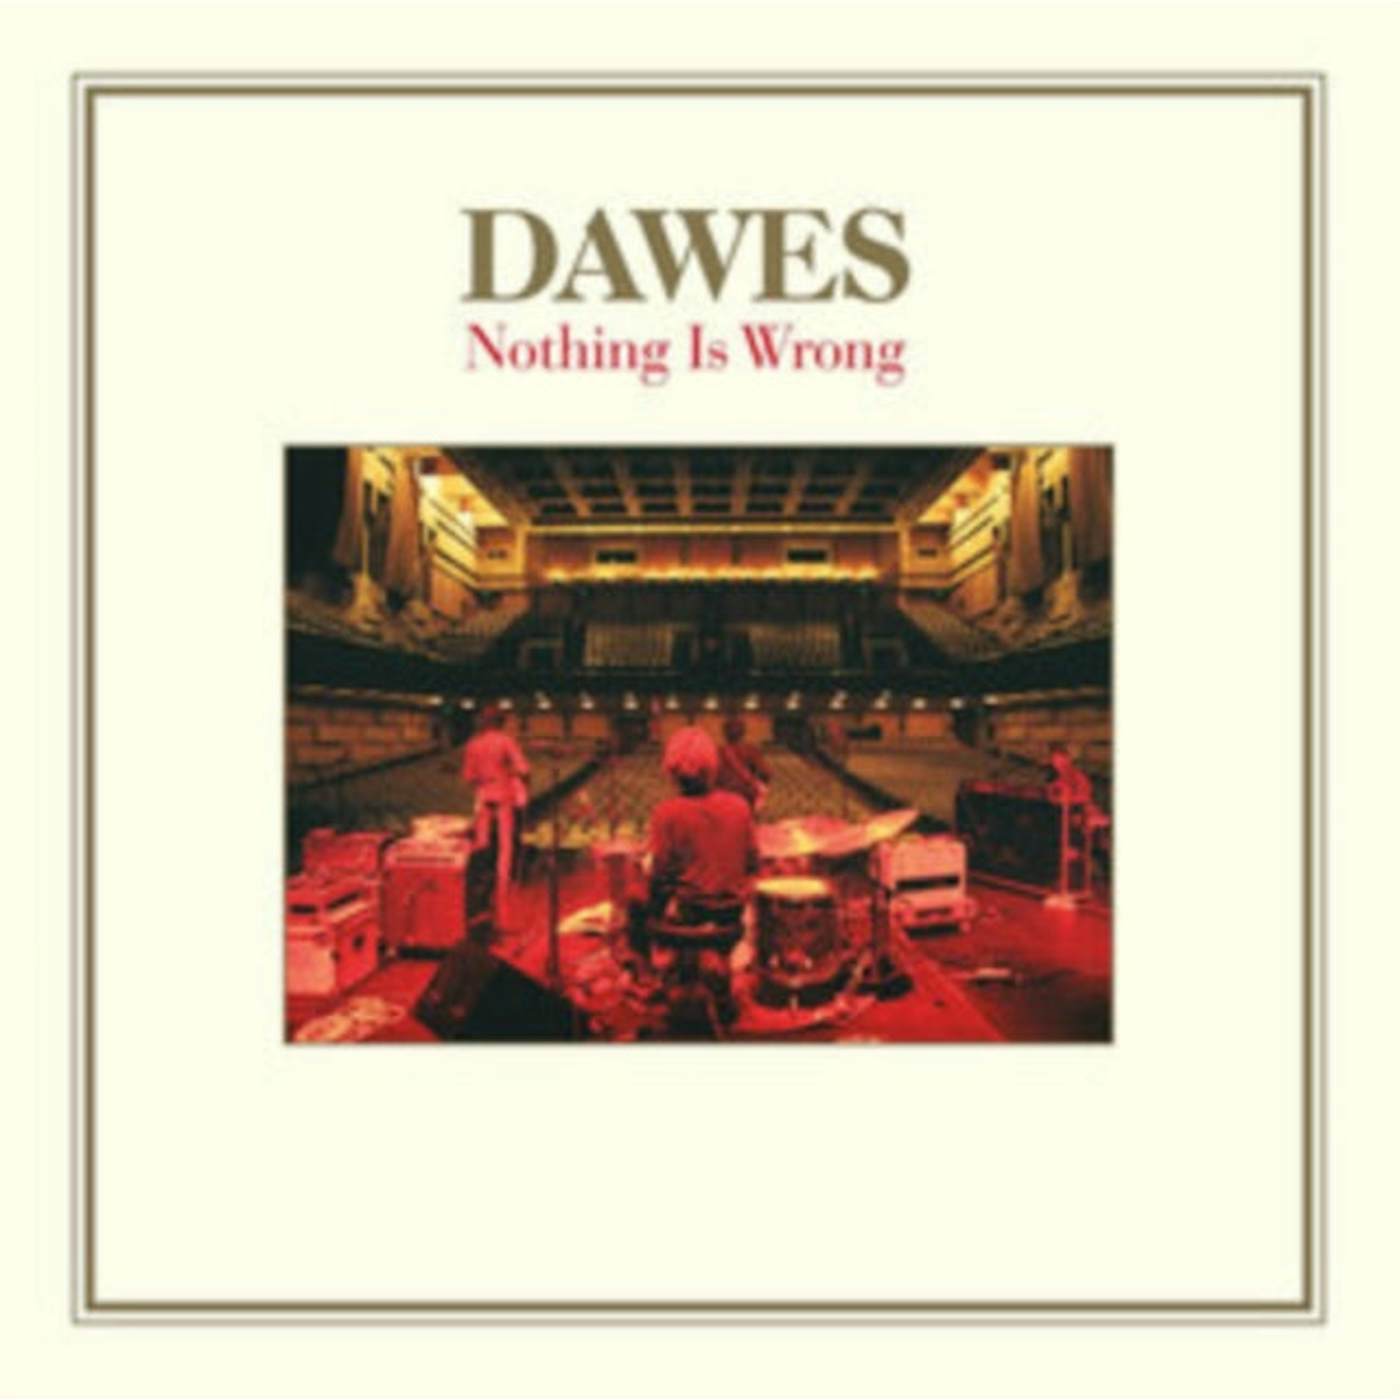 Dawes LP Vinyl Record - Nothing Is Wrong (10 th Anniversary Deluxe Edition) (Gold/Silver/Black Swirl Vinyl)